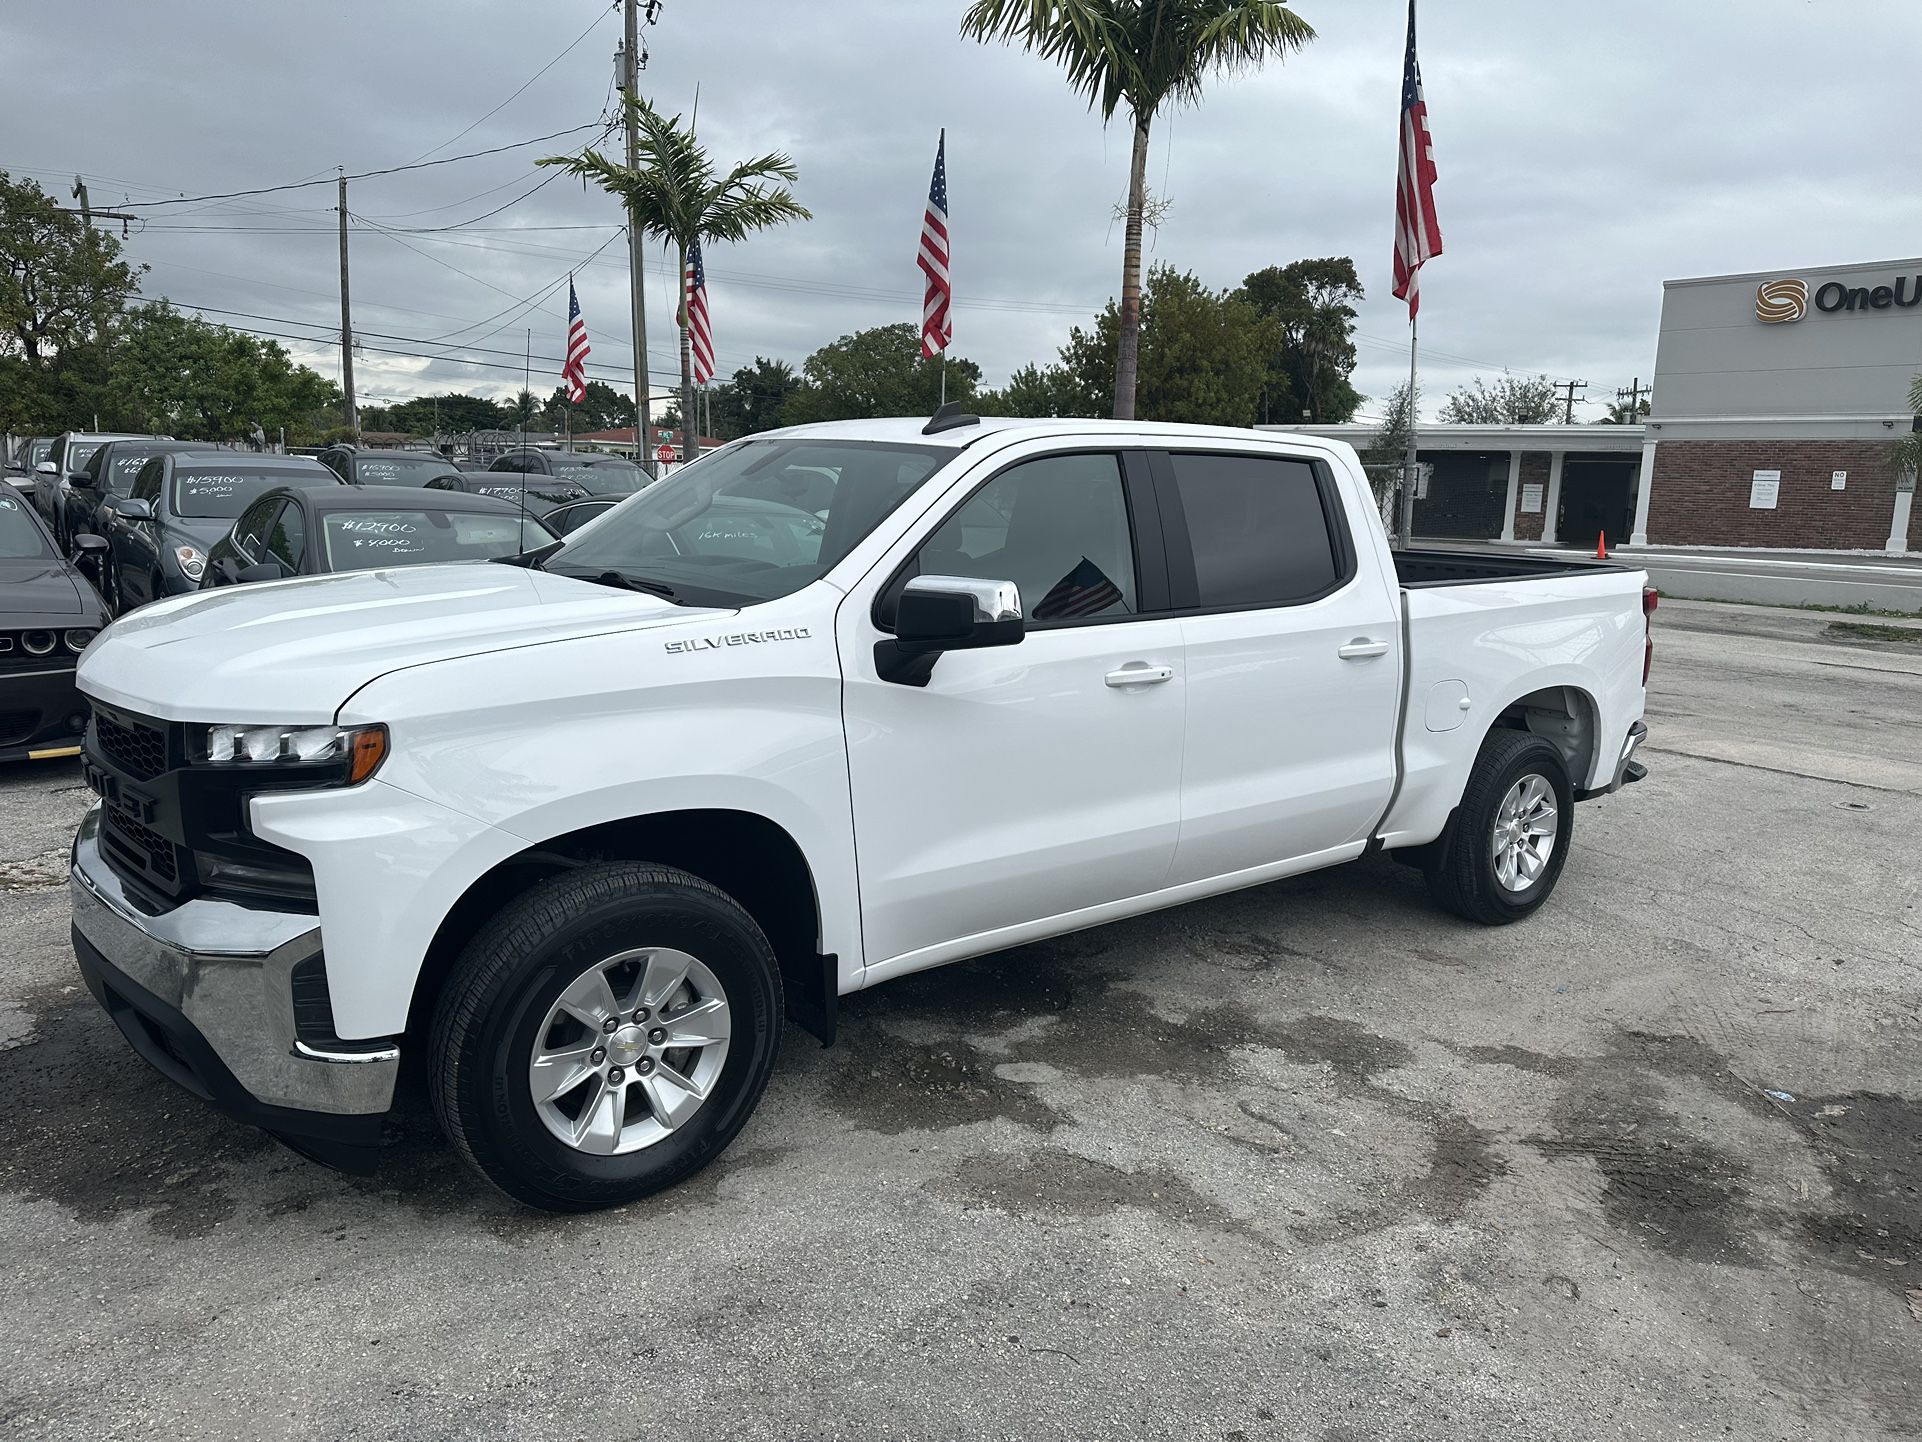 used 2020 chevy silverado - front view 3